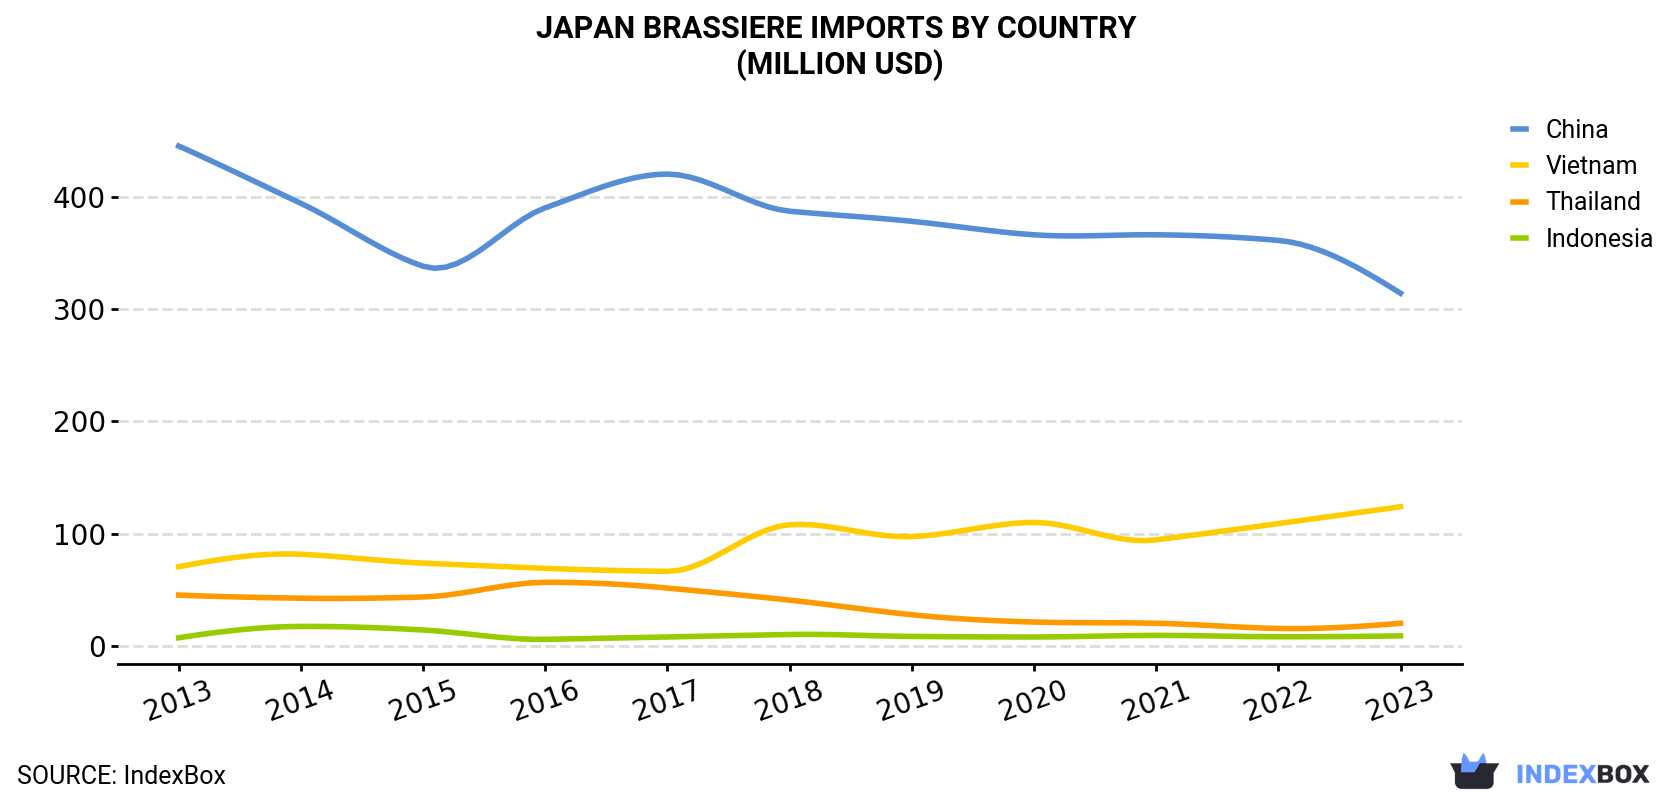 Japan Brassiere Imports By Country (Million USD)